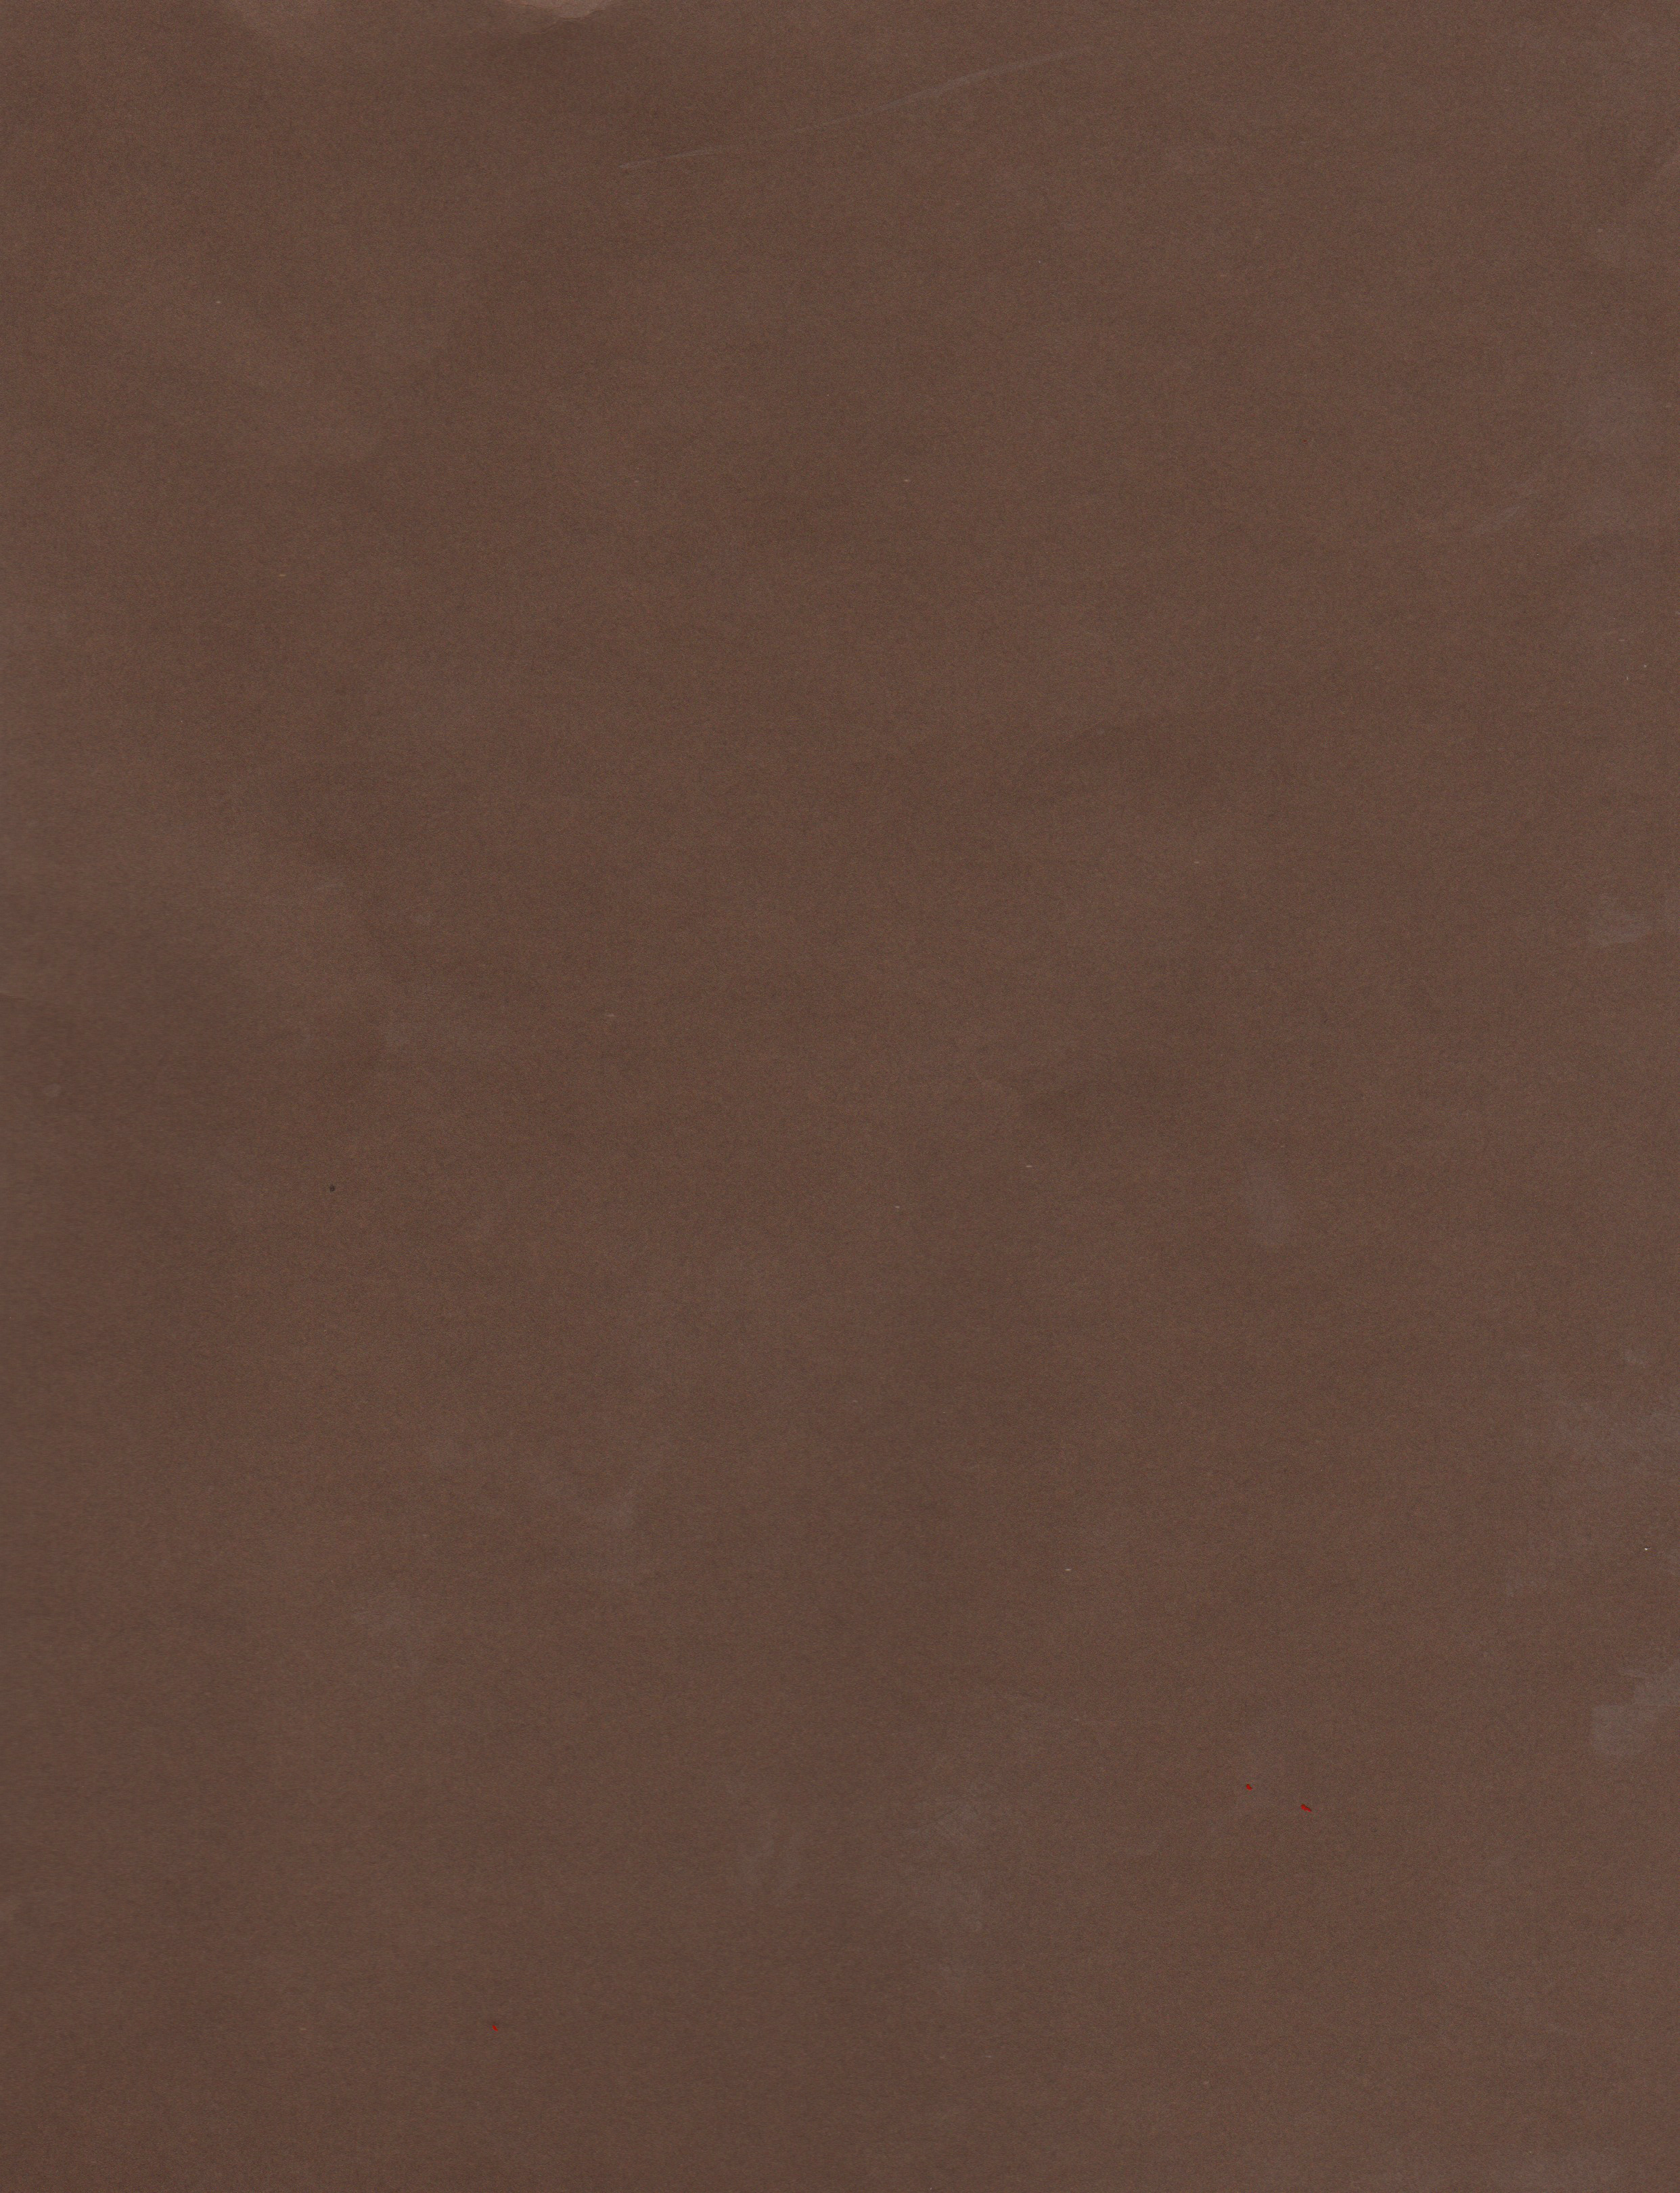 Free Brown Paper And Cardboard Texture Texture - L+T